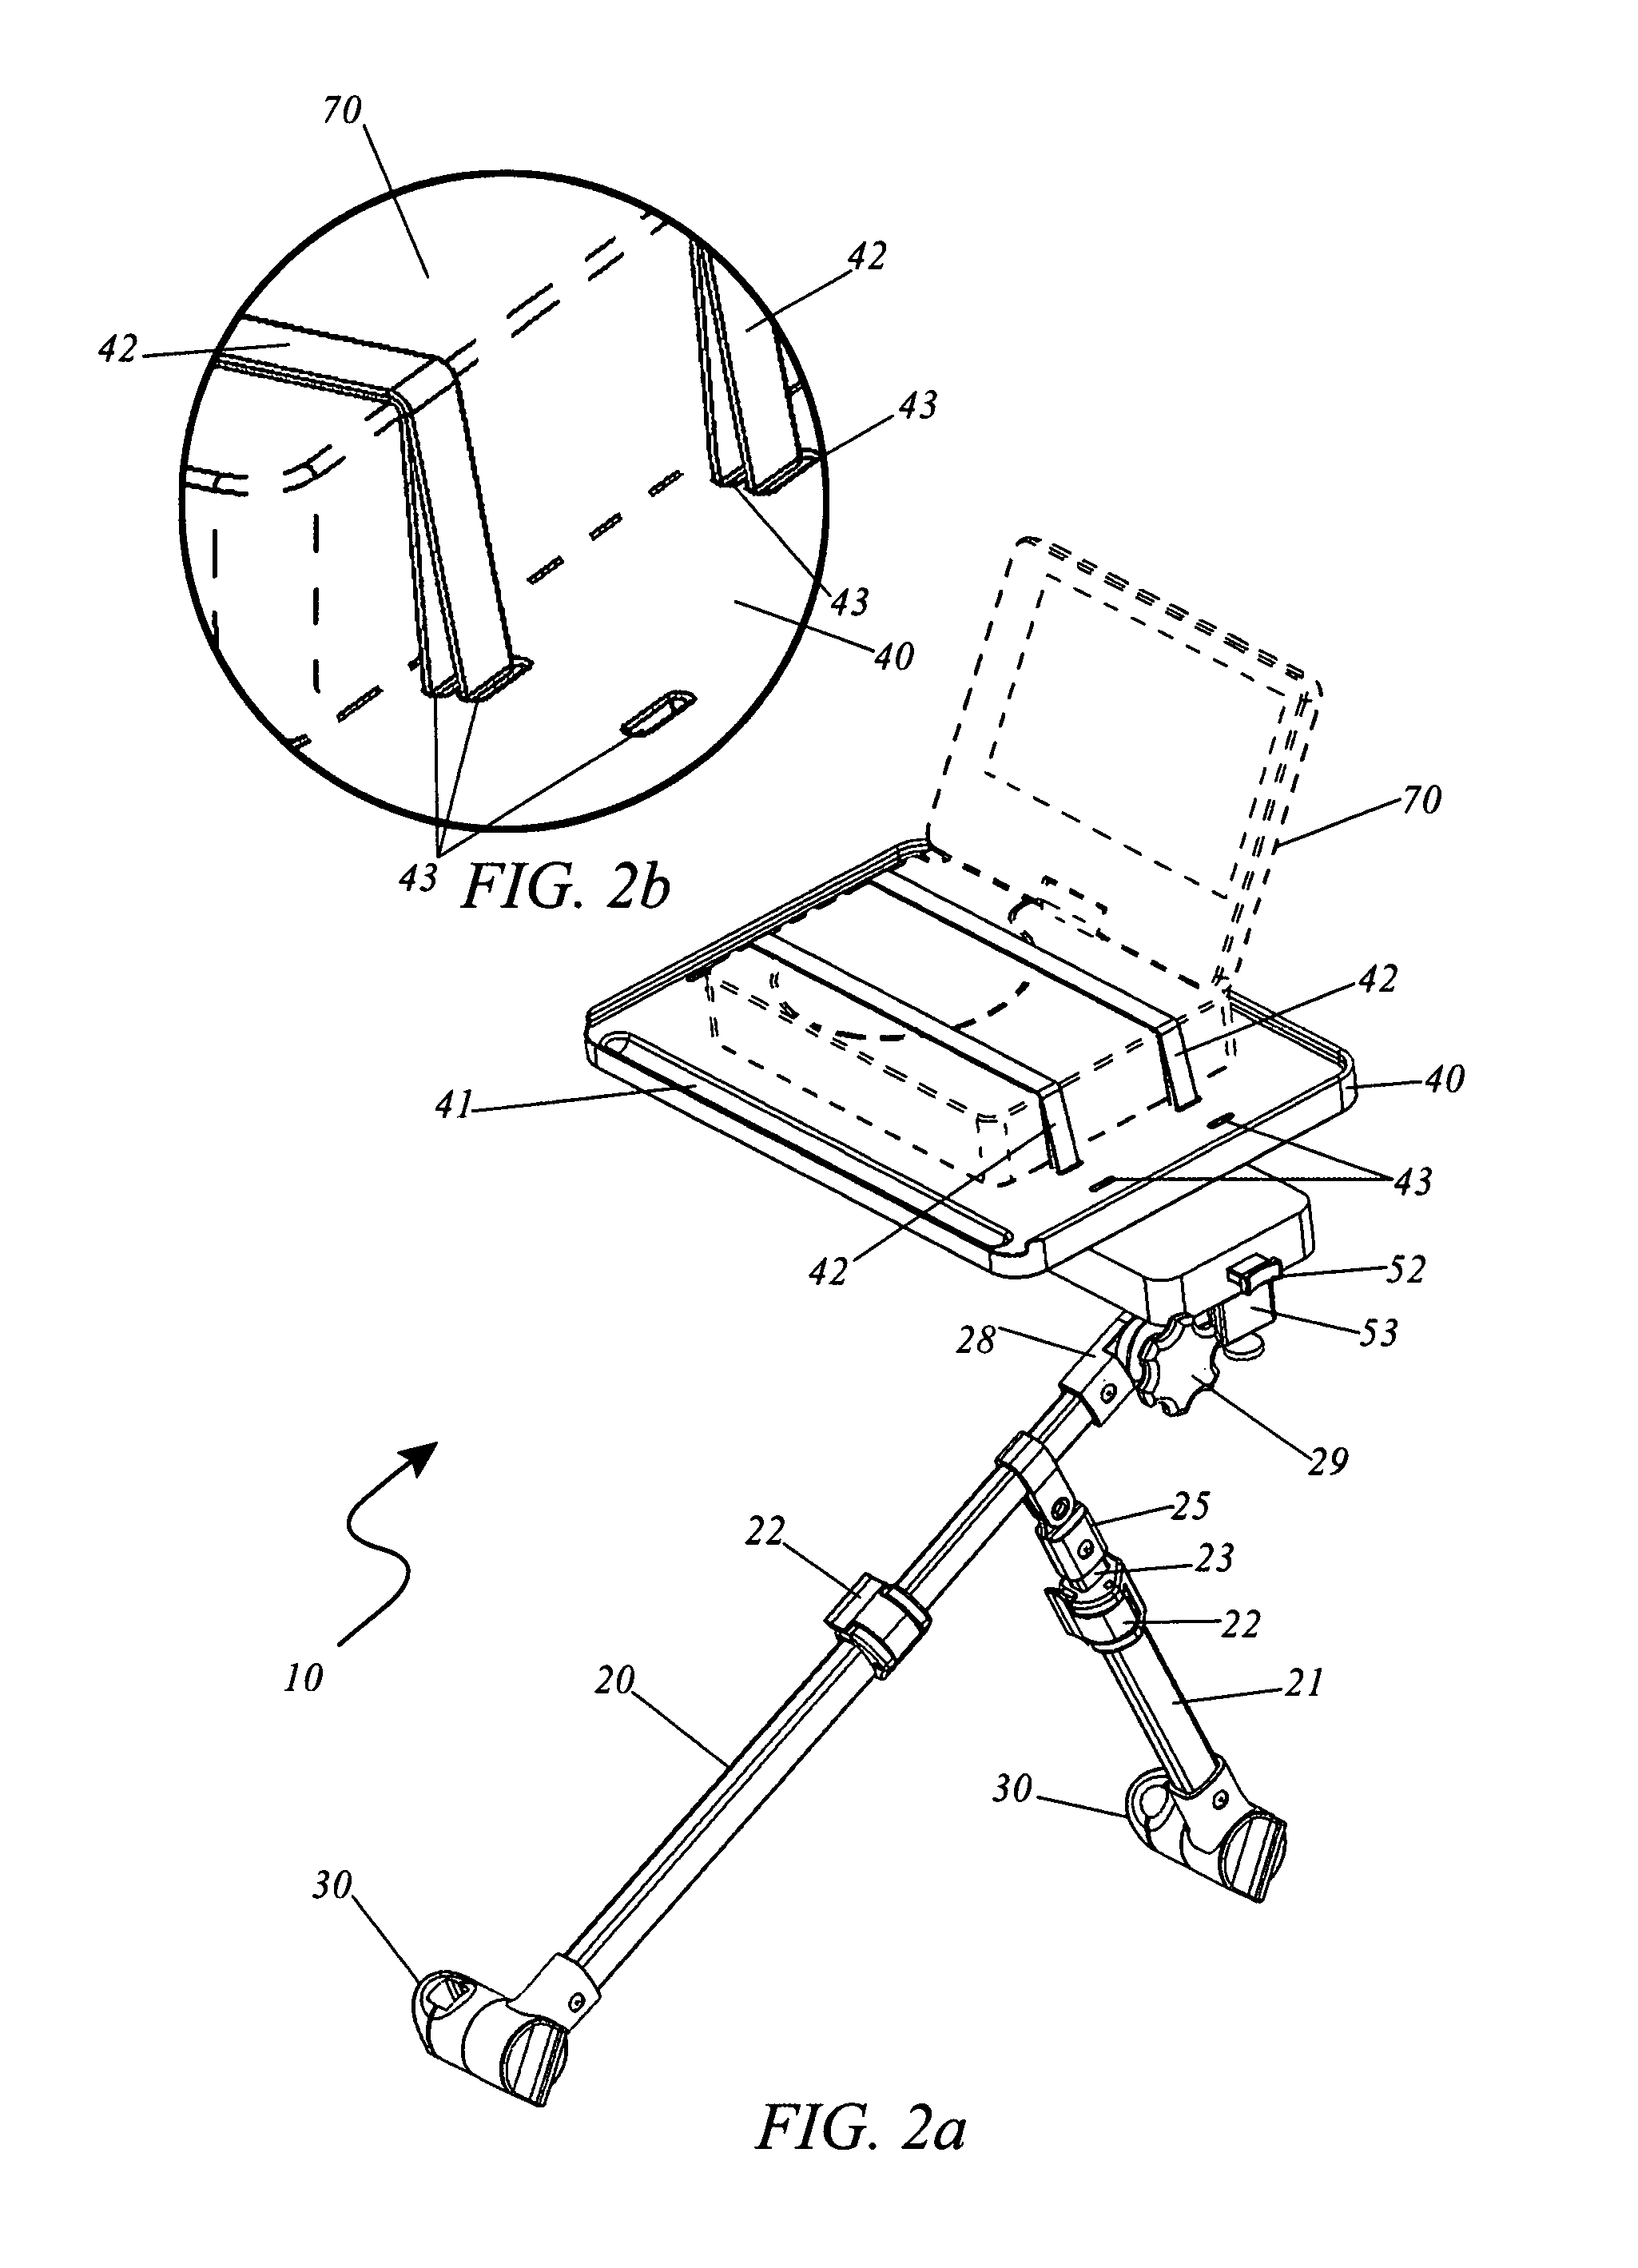 Attachment means for portable multimedia device